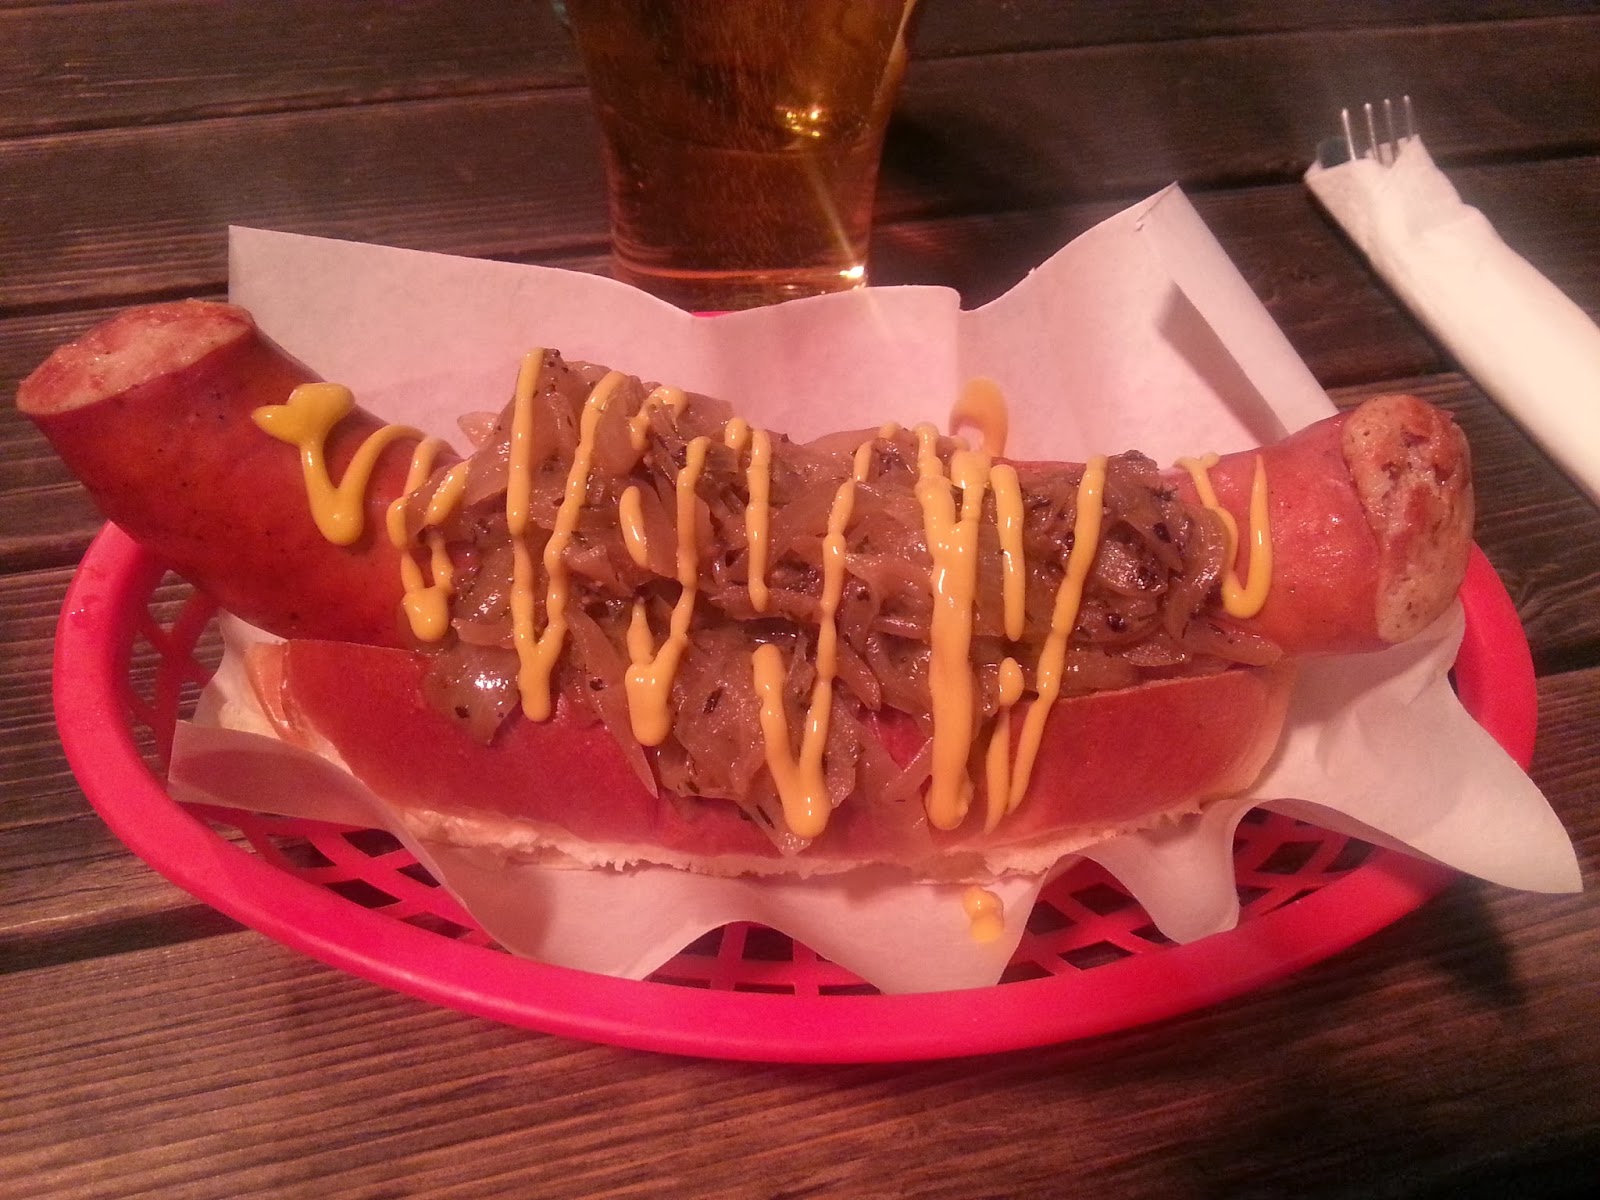 Big Apple Hot Dogs Huge Pole dog from The Ring, Southwark